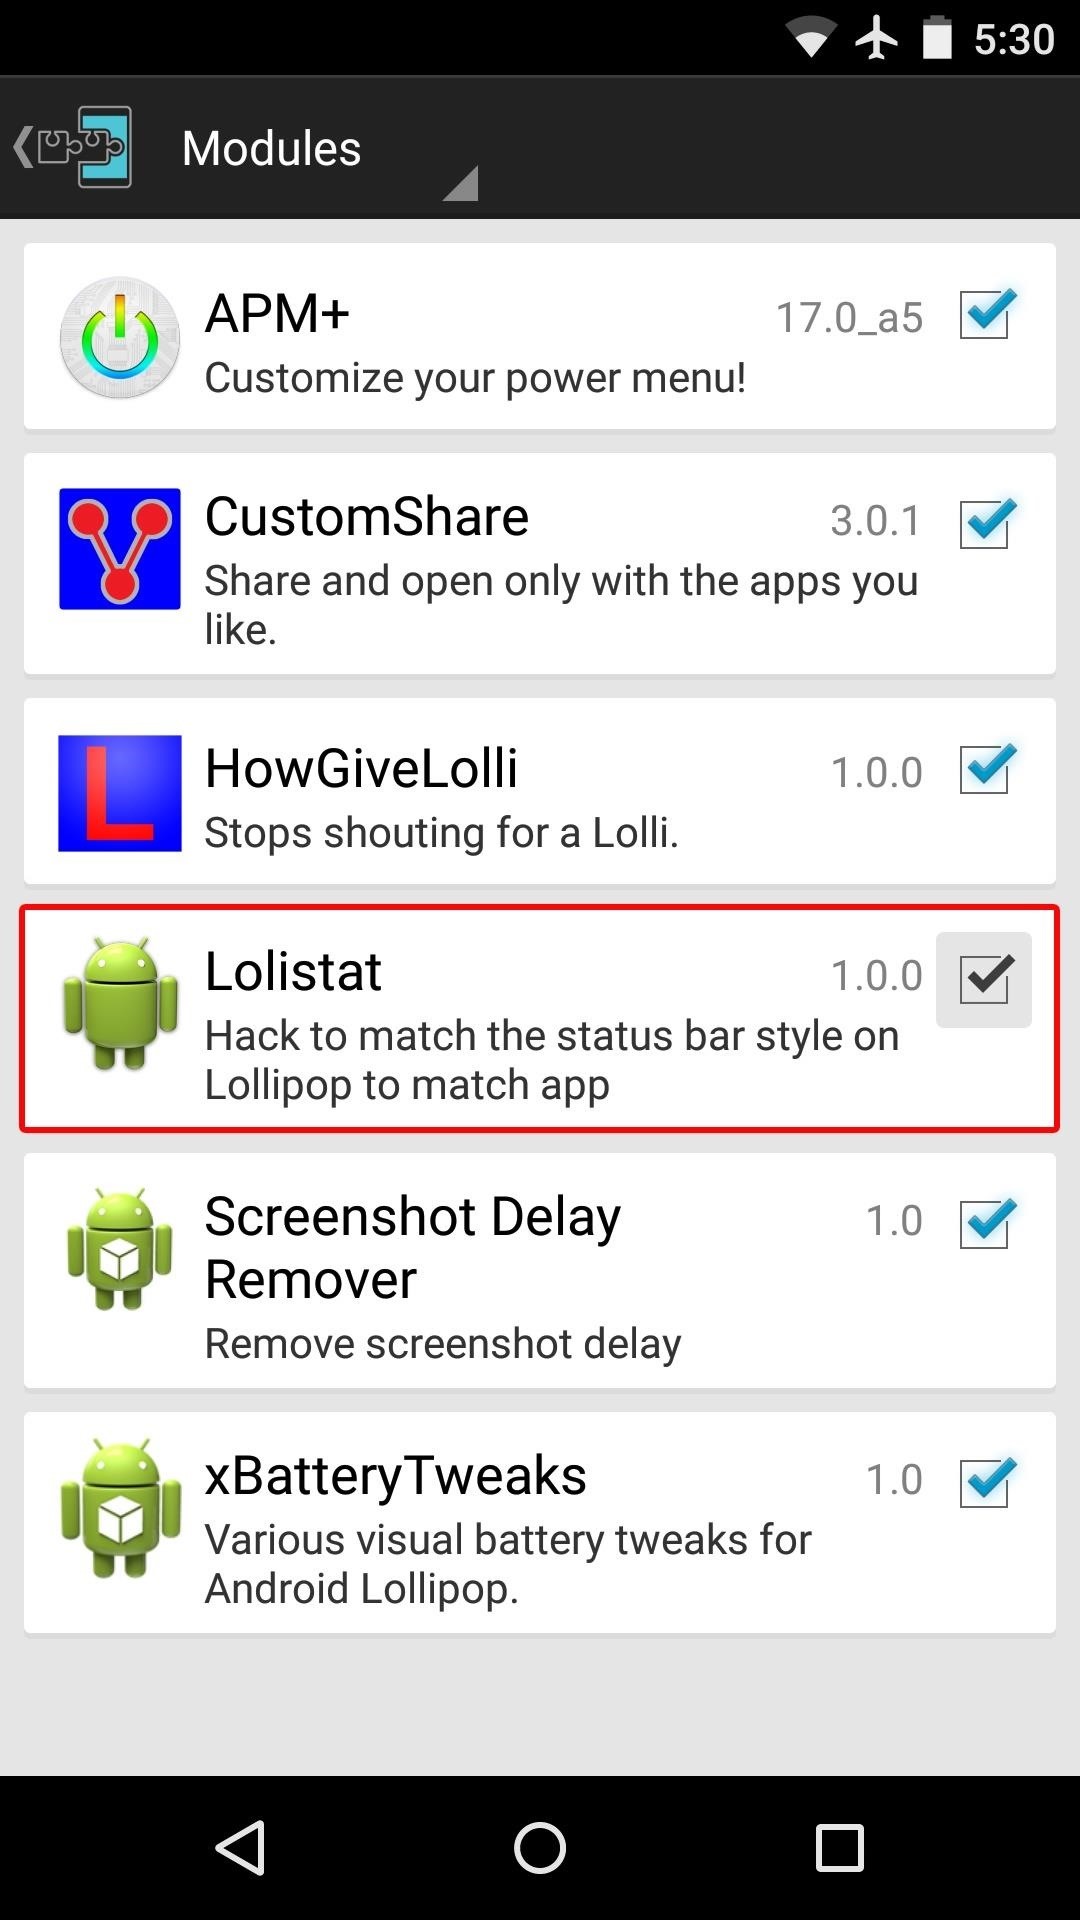 Color Your Status Bar to Match Any App in Android Lollipop